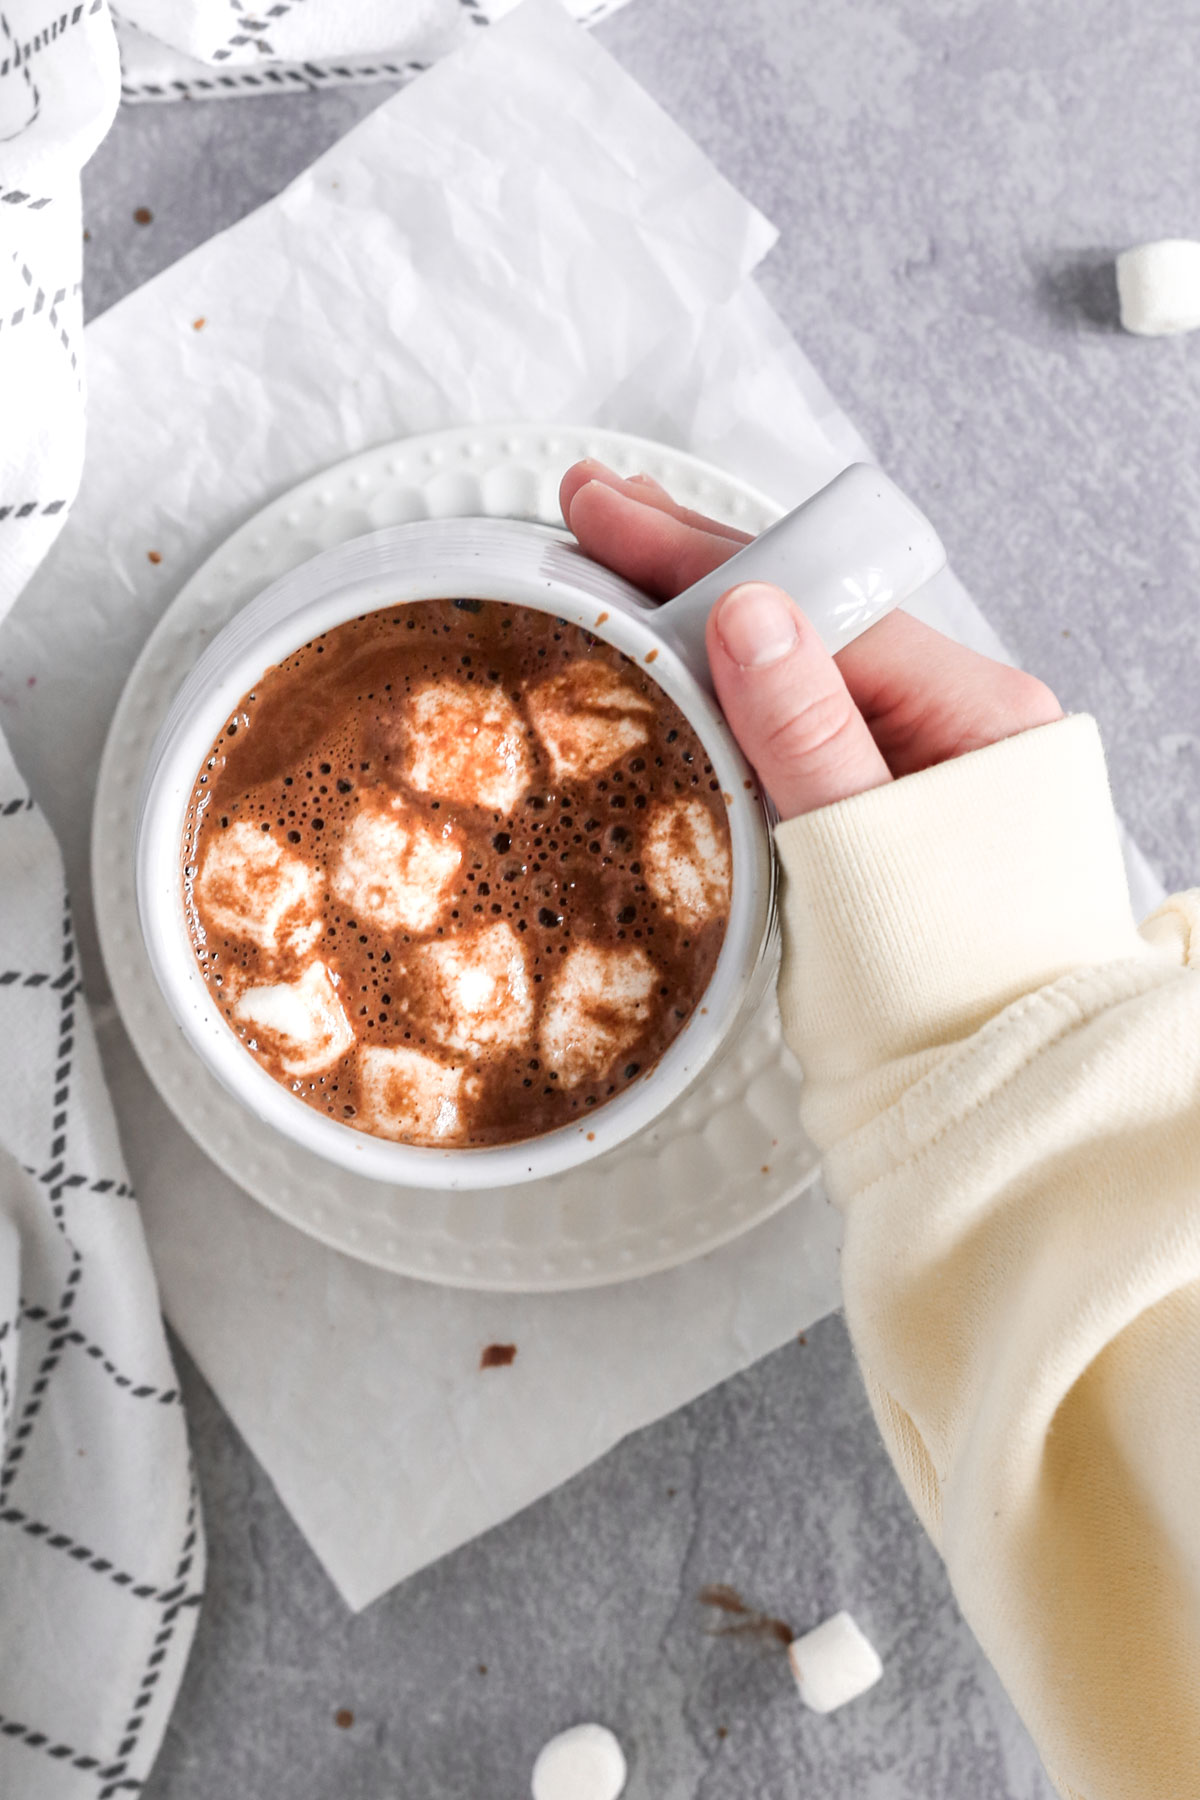 a hand placed around the warm mug of hot cocoa. There are marshmallows in the mug.